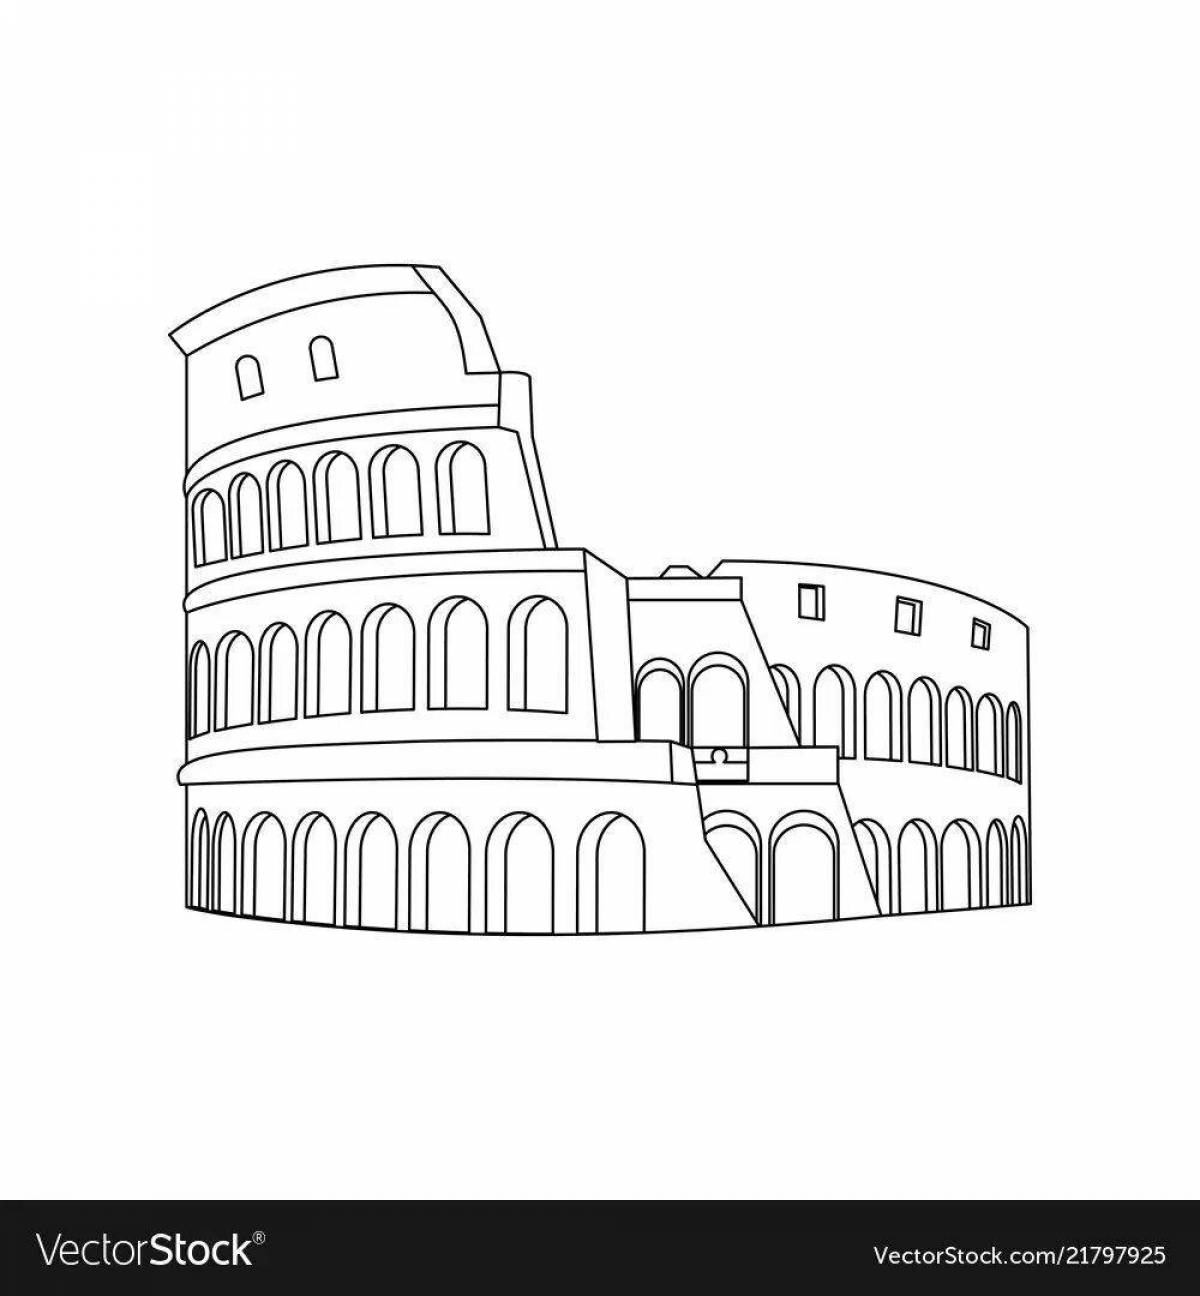 Colosseum amazing coloring book for kids